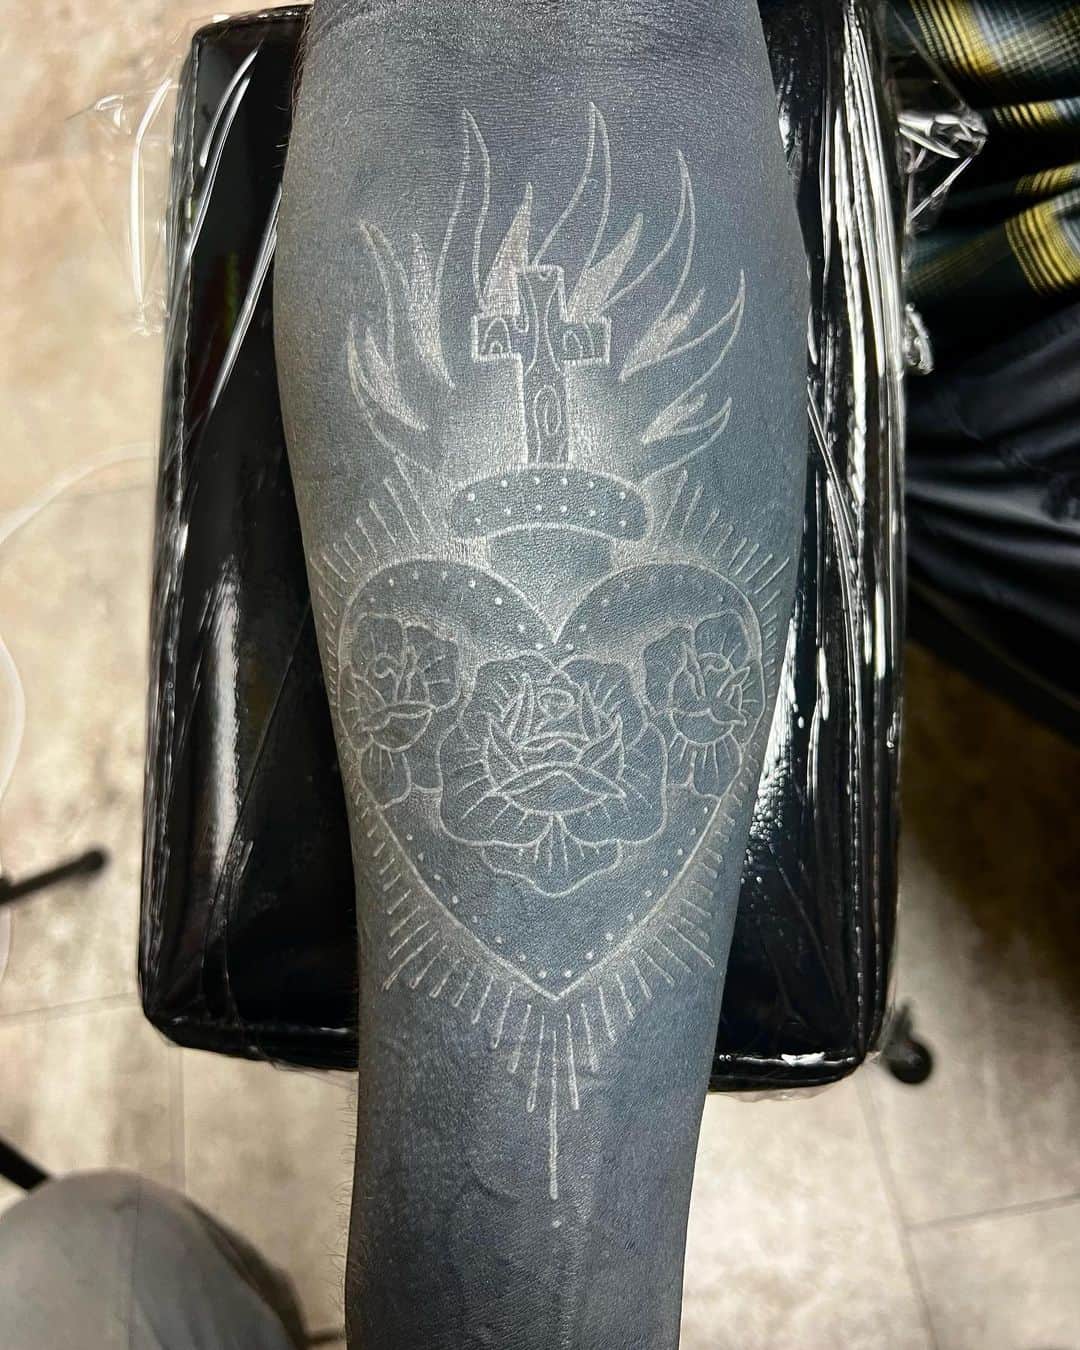 Blackout Tattoo With White Ink (Can You Use White Ink On A Blackout Tattoo?)  - Saved Tattoo